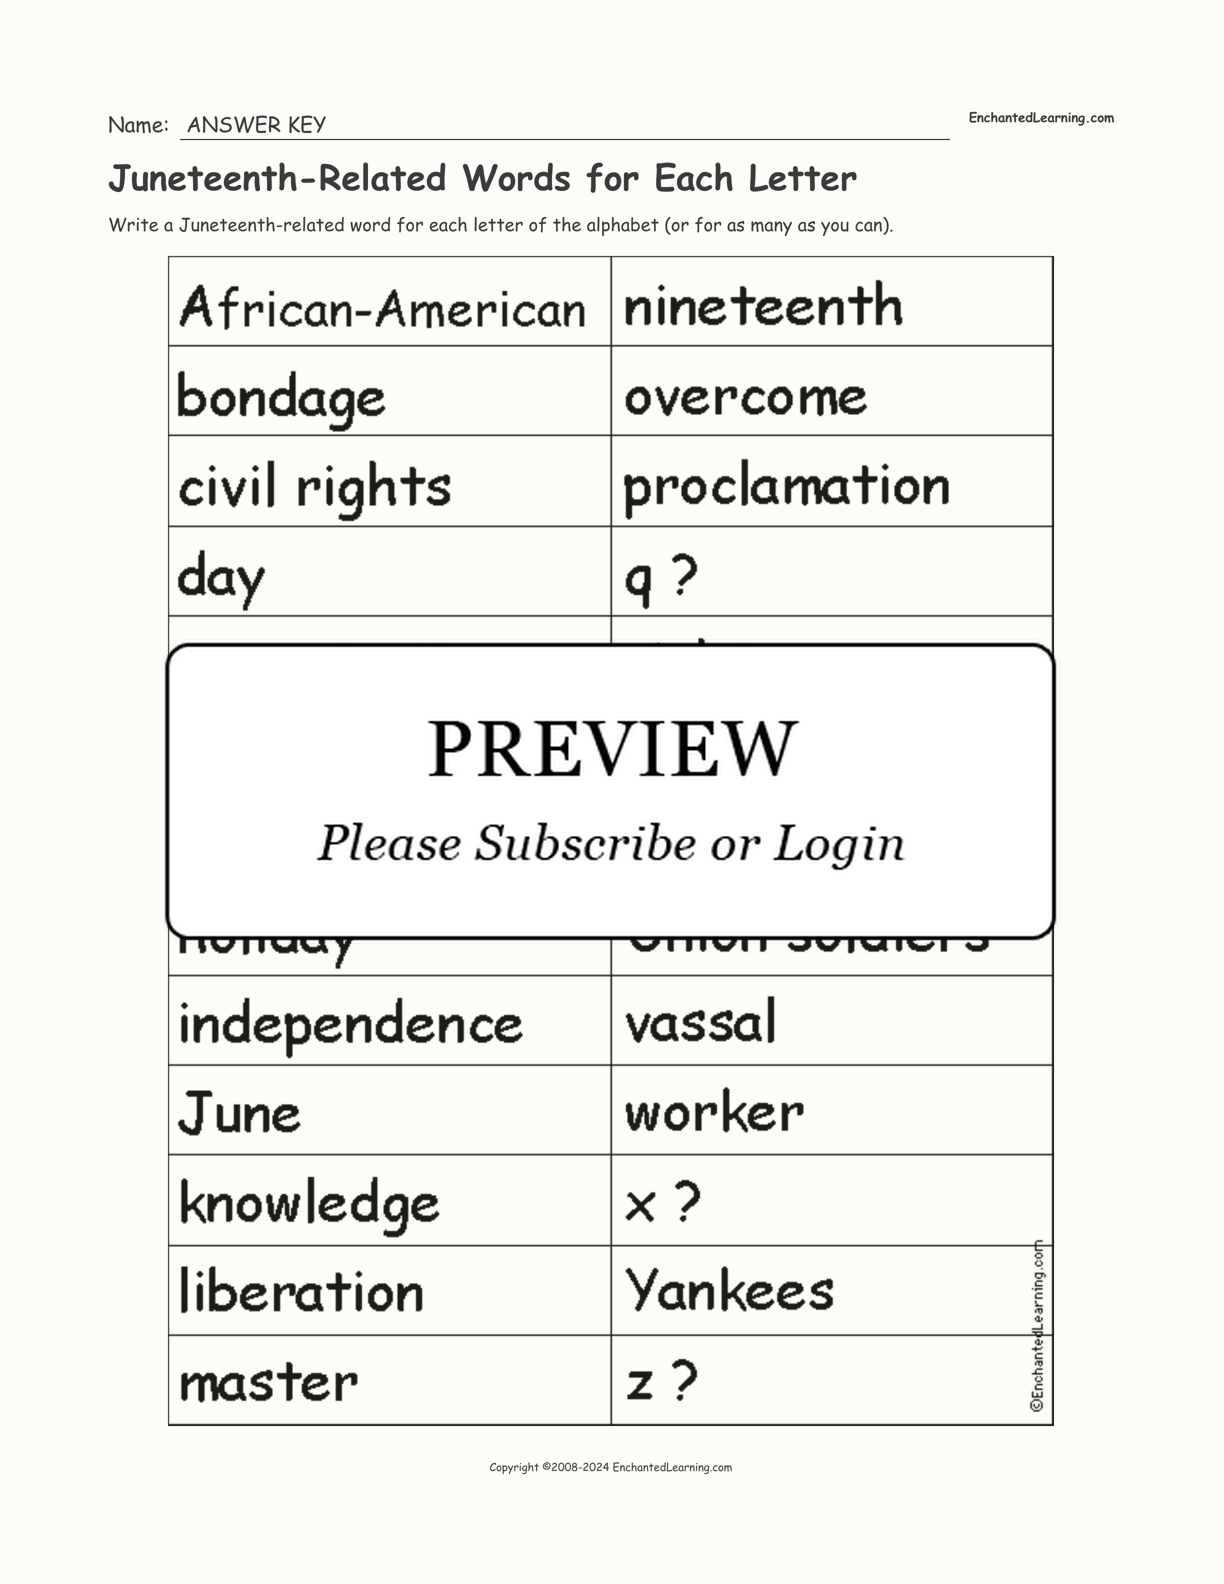 Juneteenth-Related Words for Each Letter interactive worksheet page 2